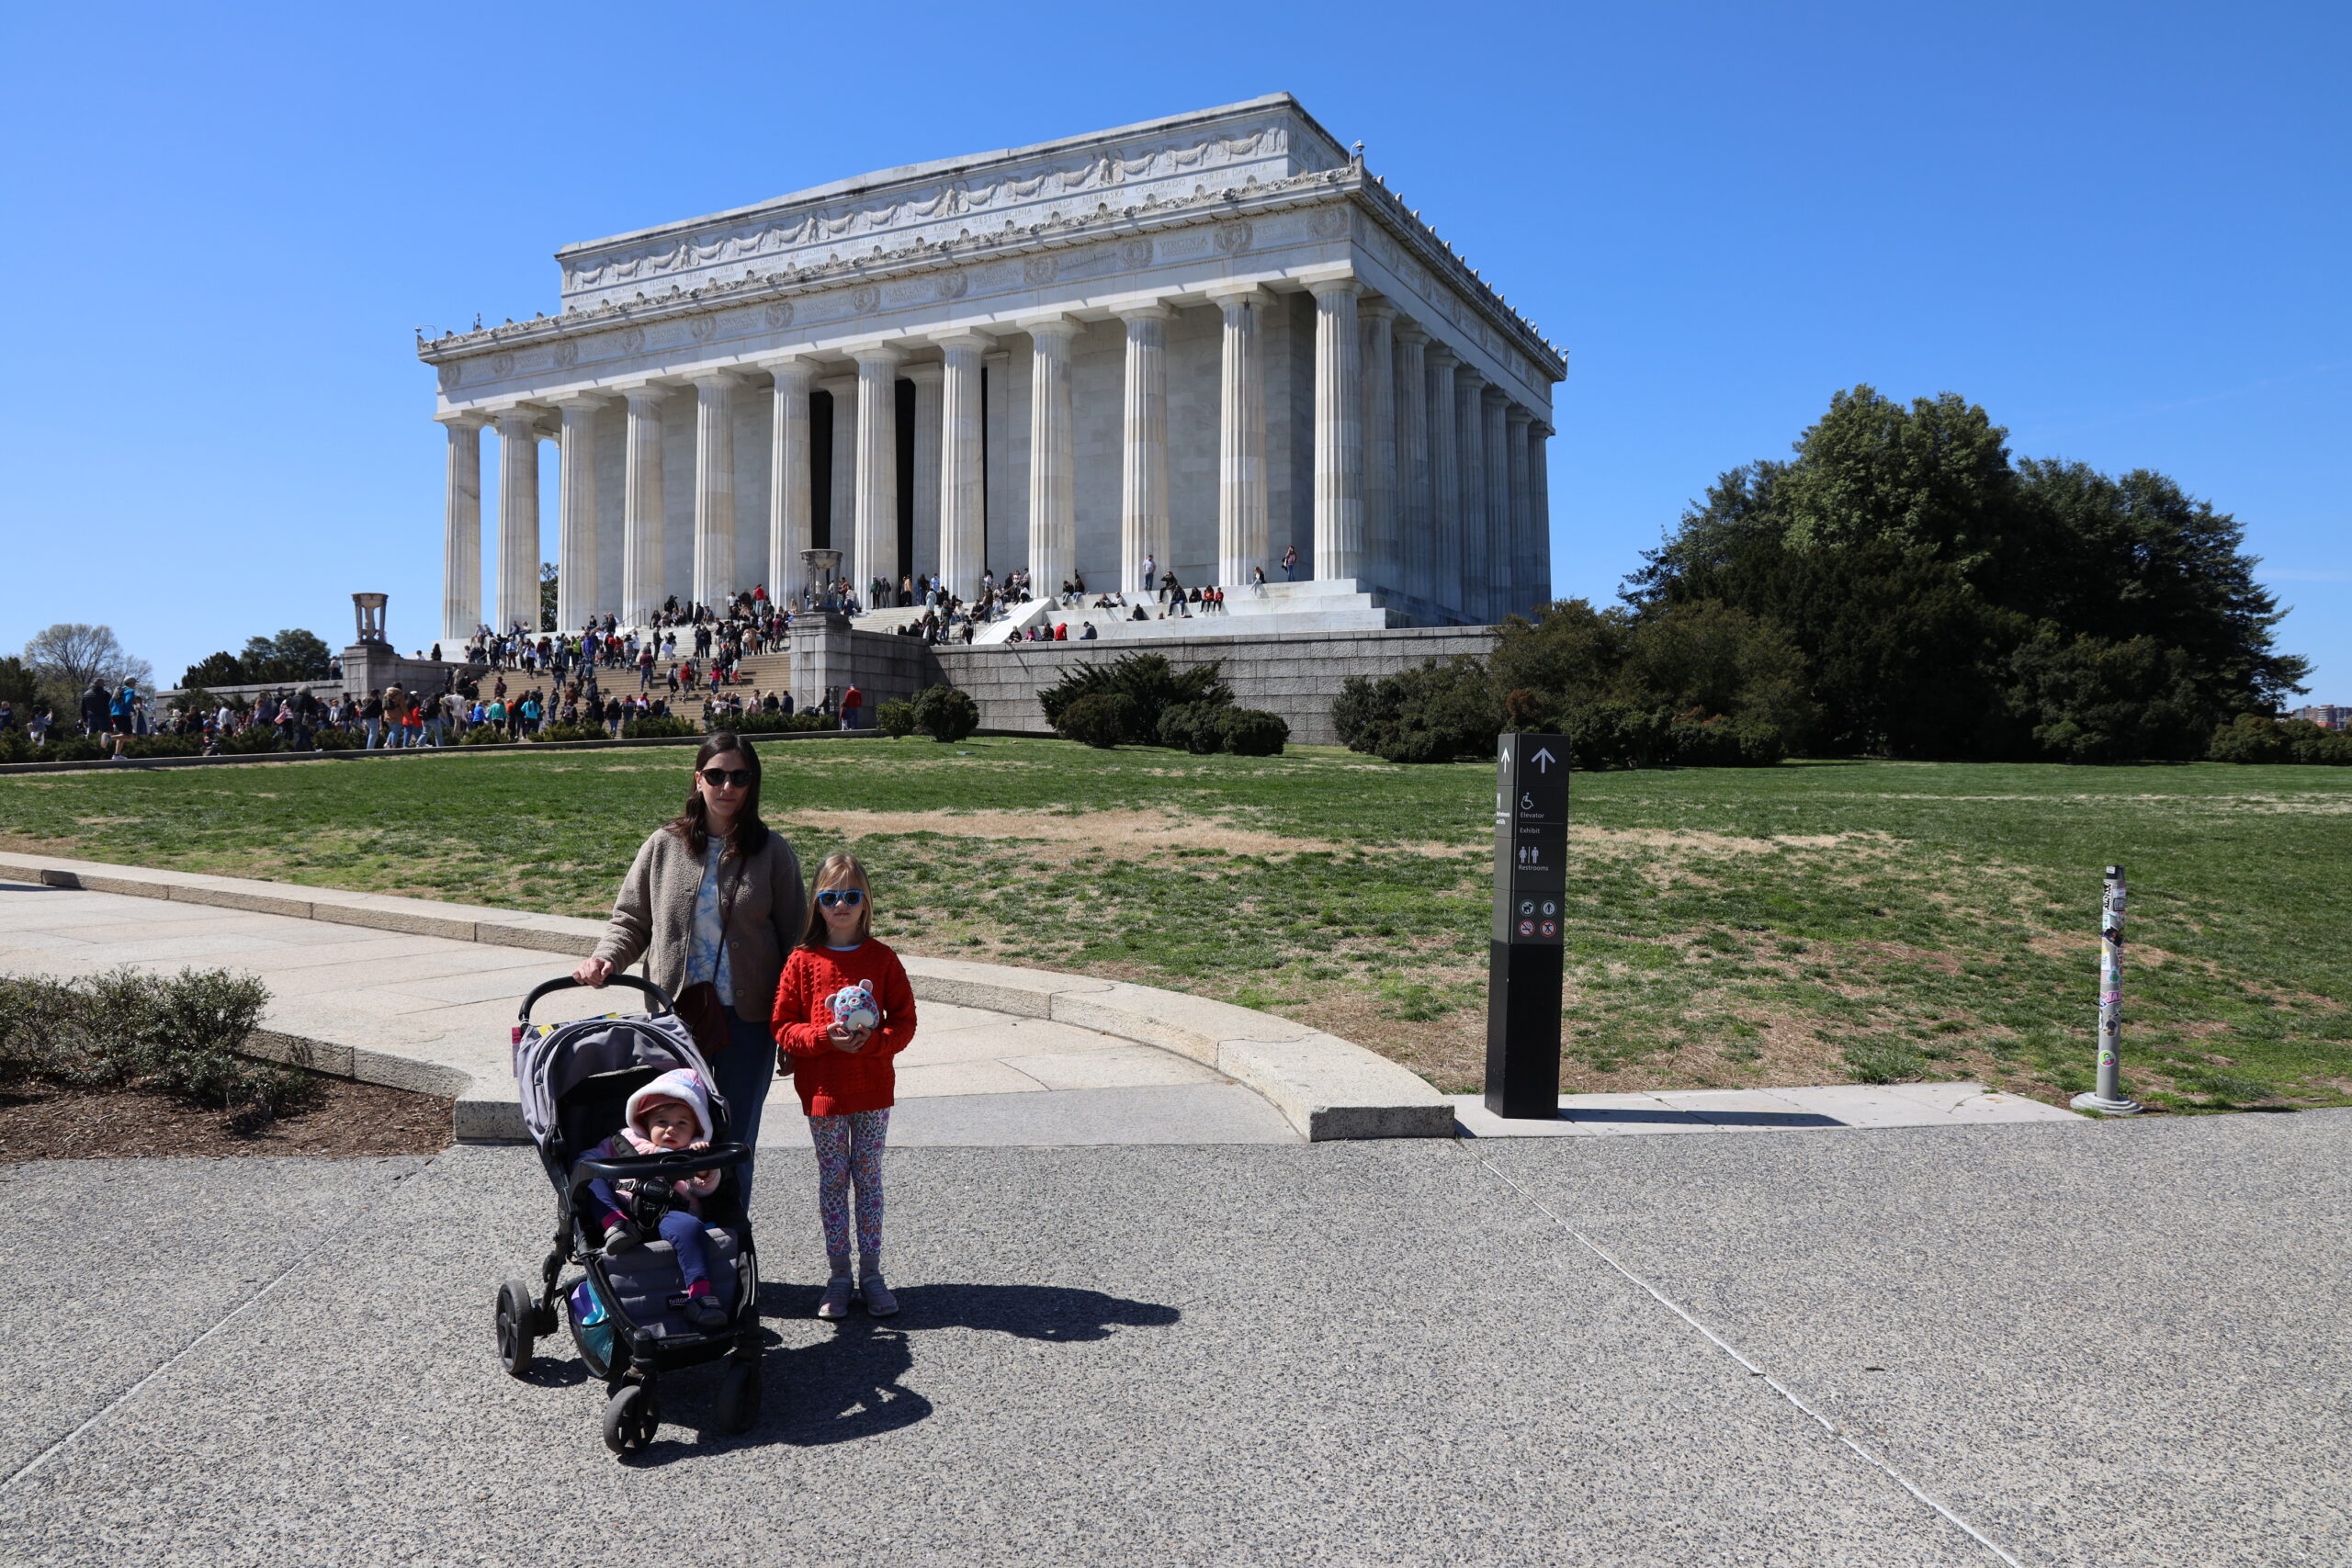 Outside of the Lincoln Memorial in Washington D.C.